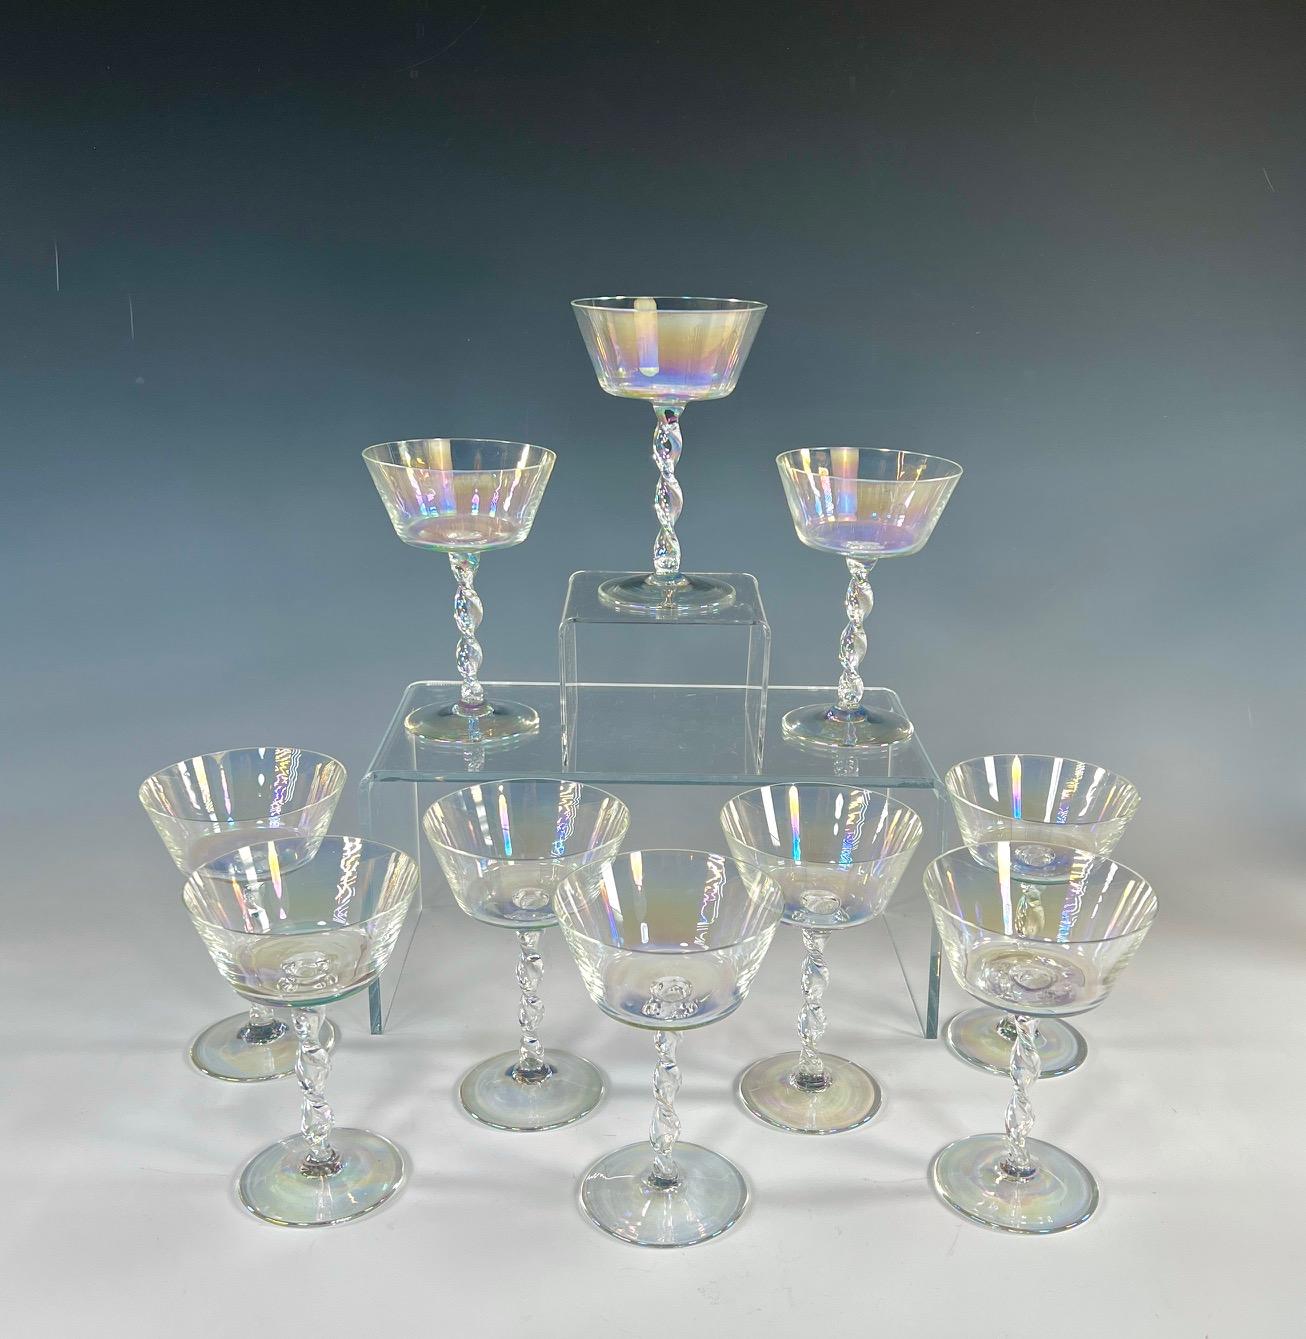 This amazing set of 11 hand blown crystal champagne coupes are sure to please, whether filled with you favorite champagne or cocktail or just sitting on a shelf catching the light. The lustrous rainbow-like effect is a showstopper with the subtle